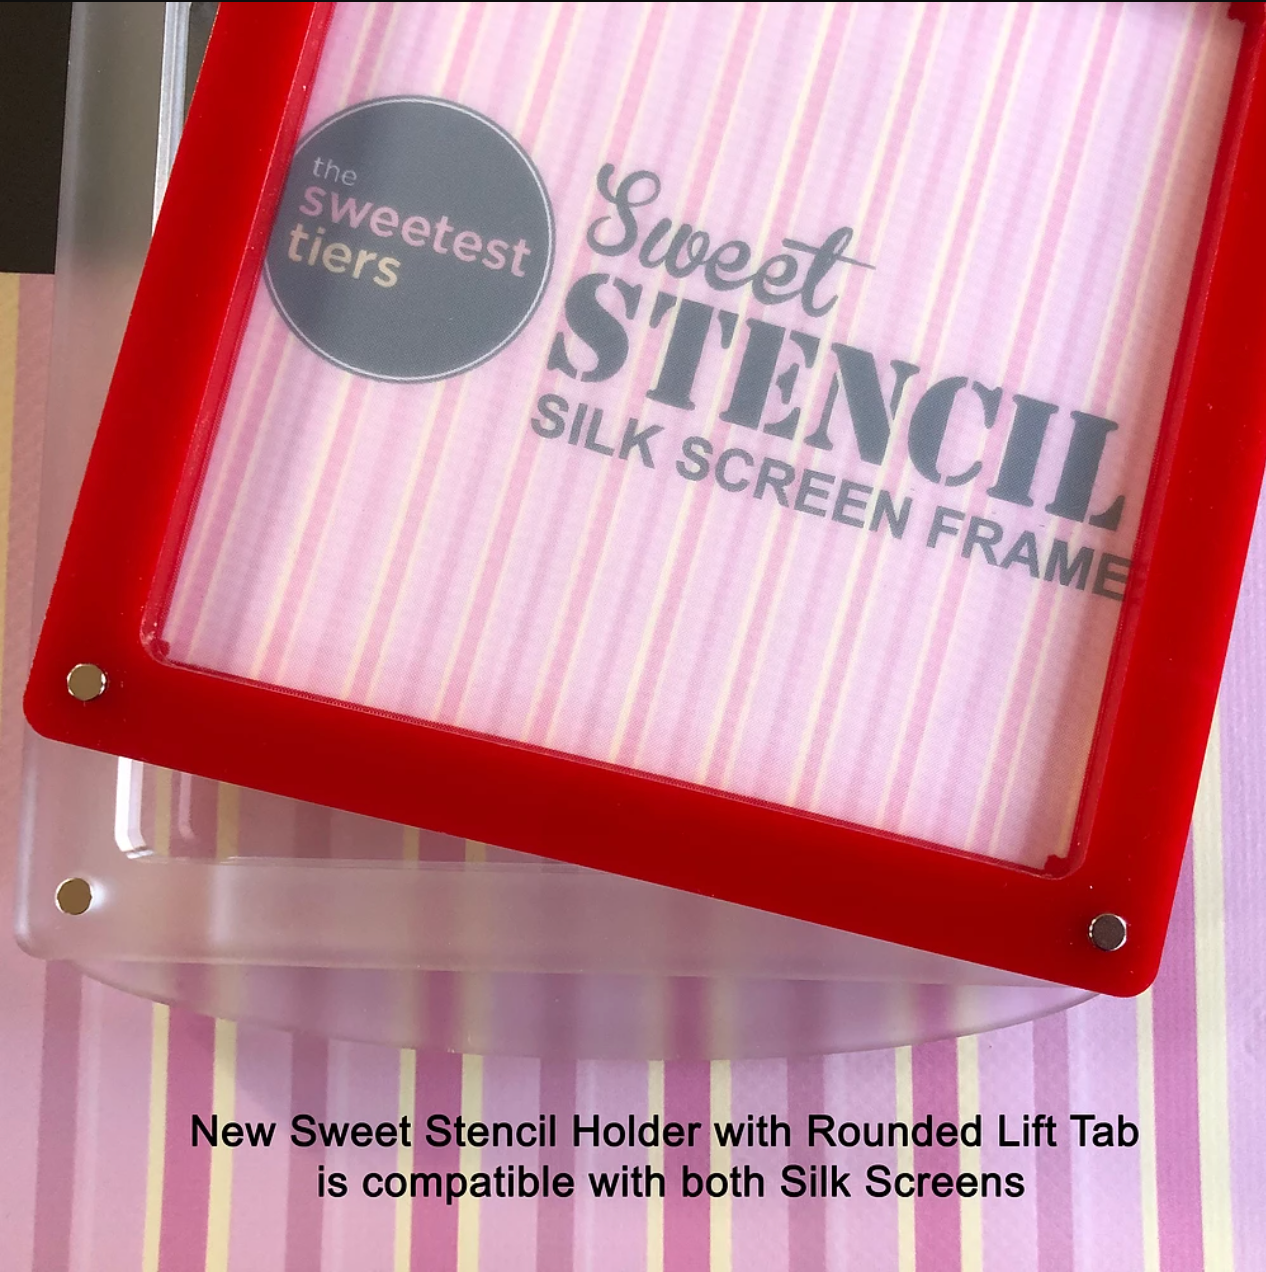 The Sweetest Tiers Stencil Holder